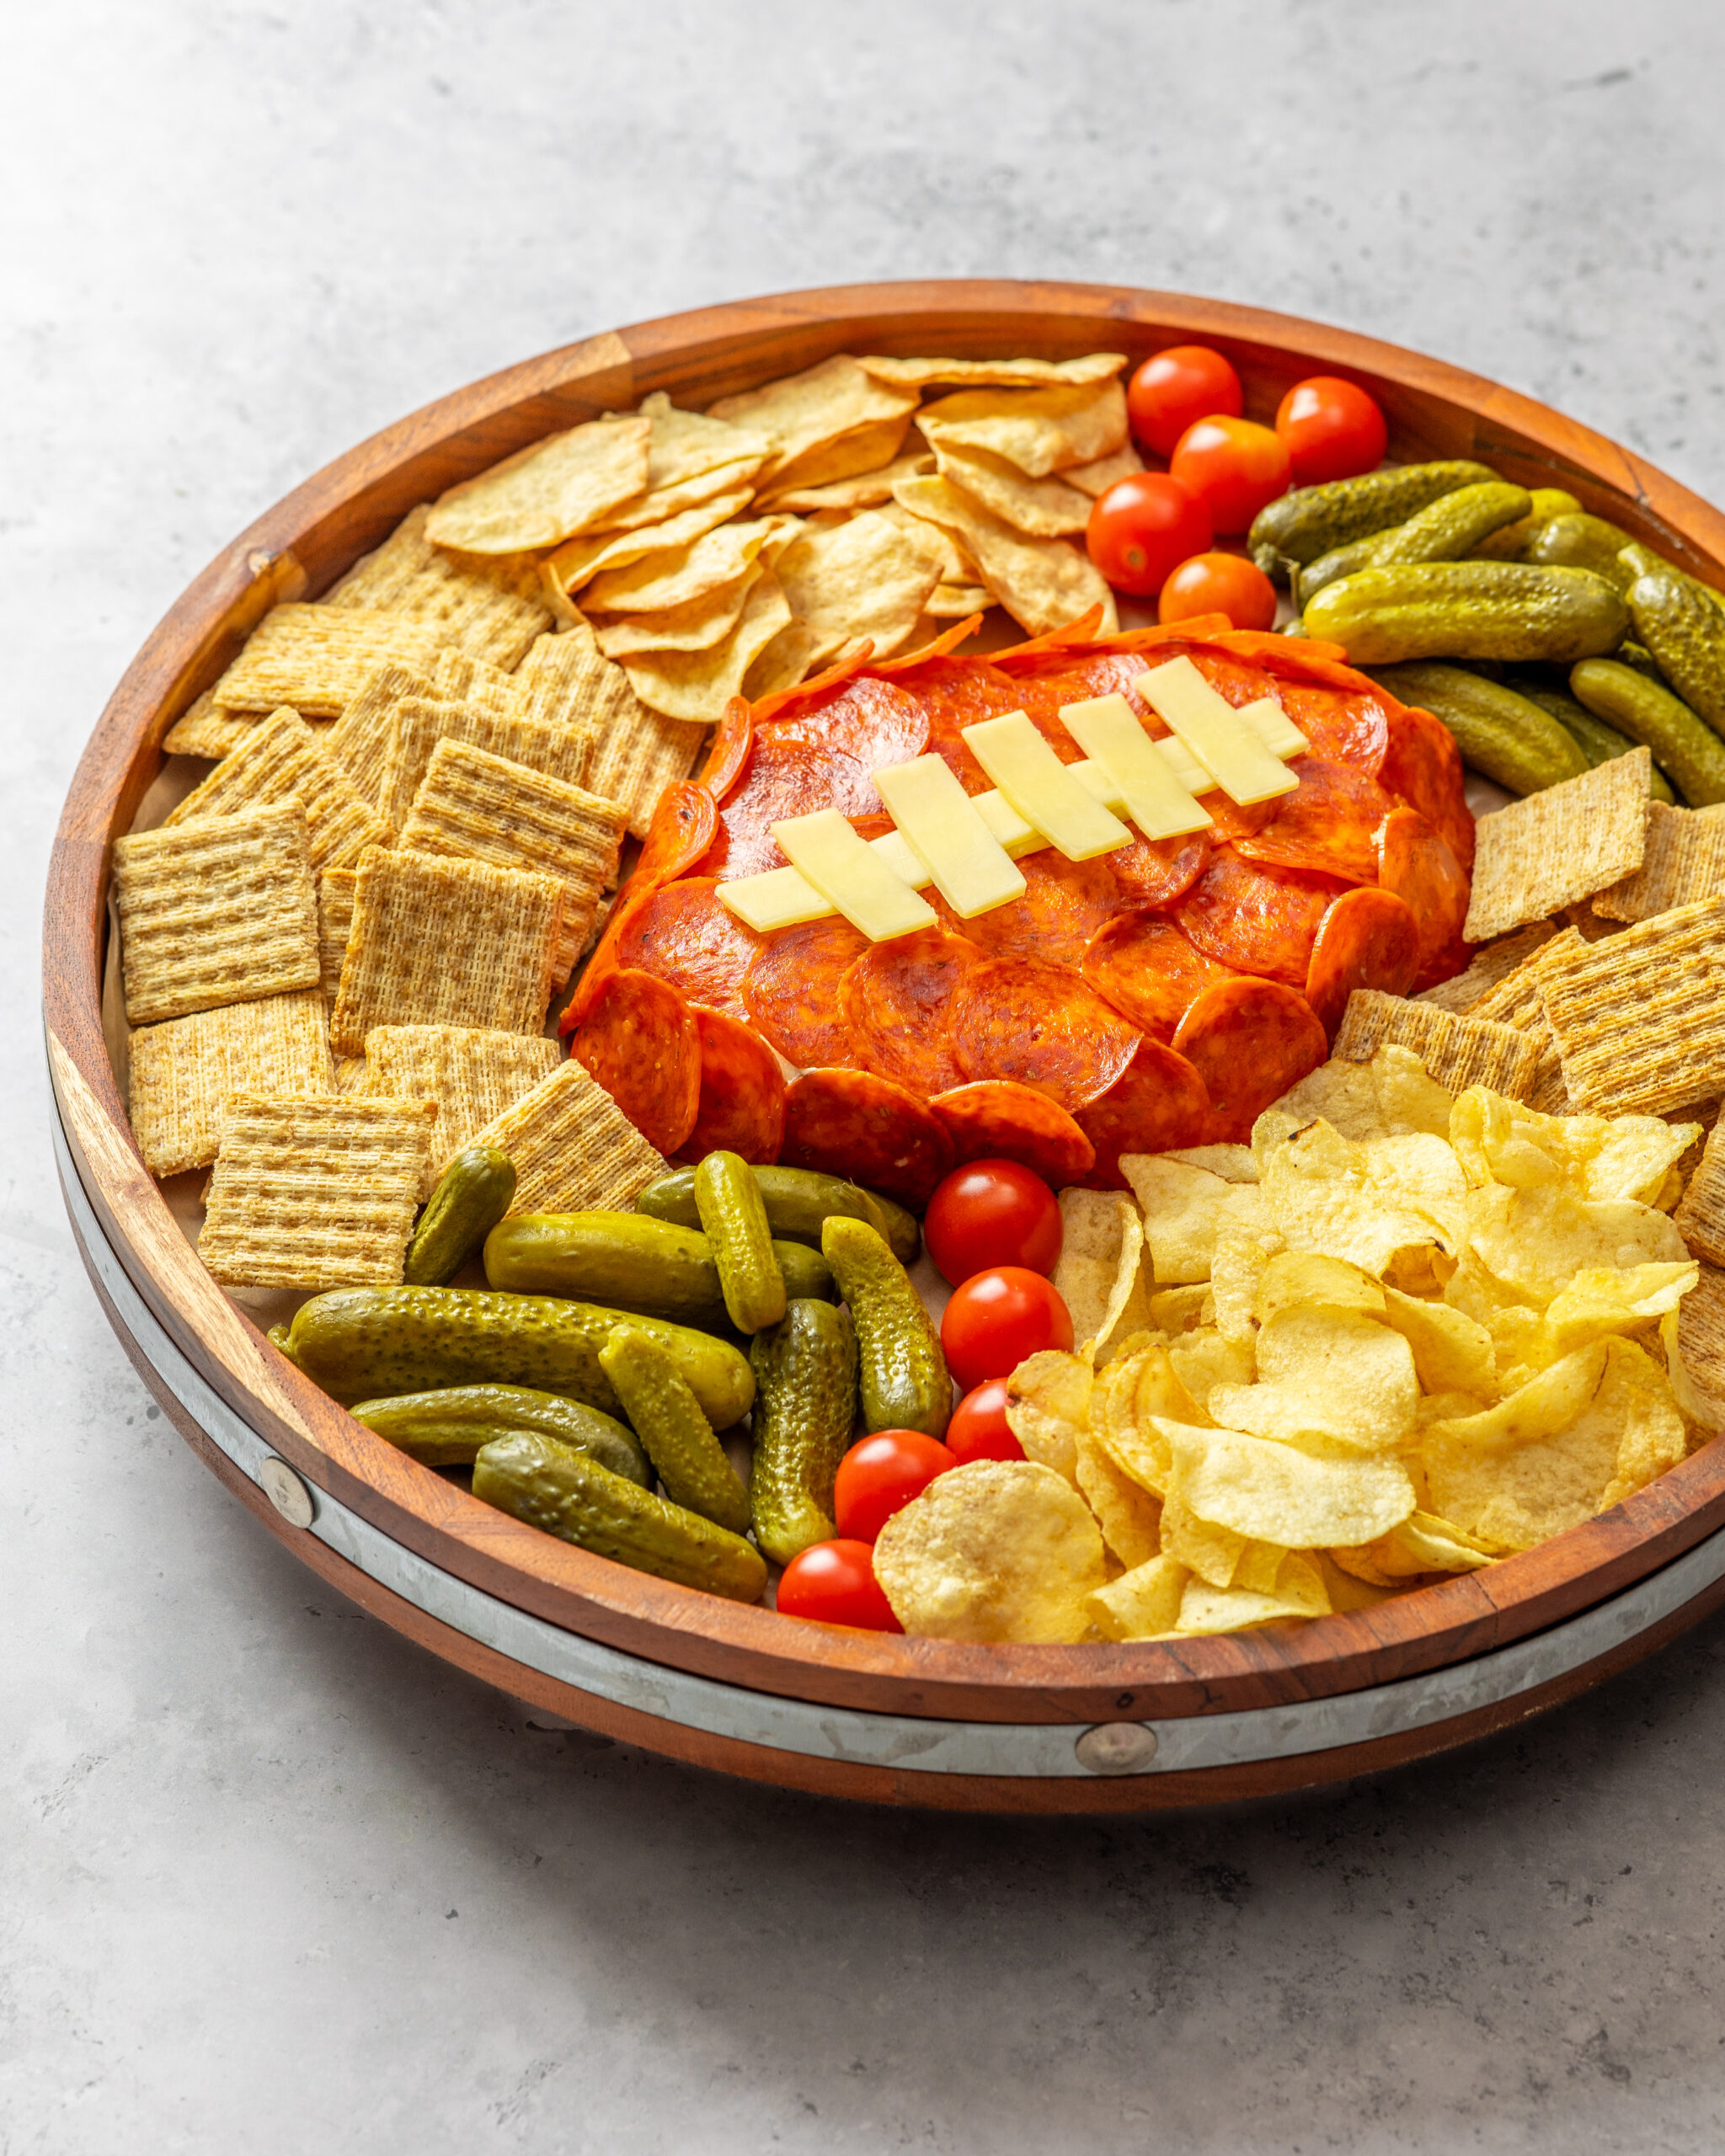 cheeseball covered in pepperoni and cheese to look like a football surrounded by pickles and crackers and chips on a round platter dish